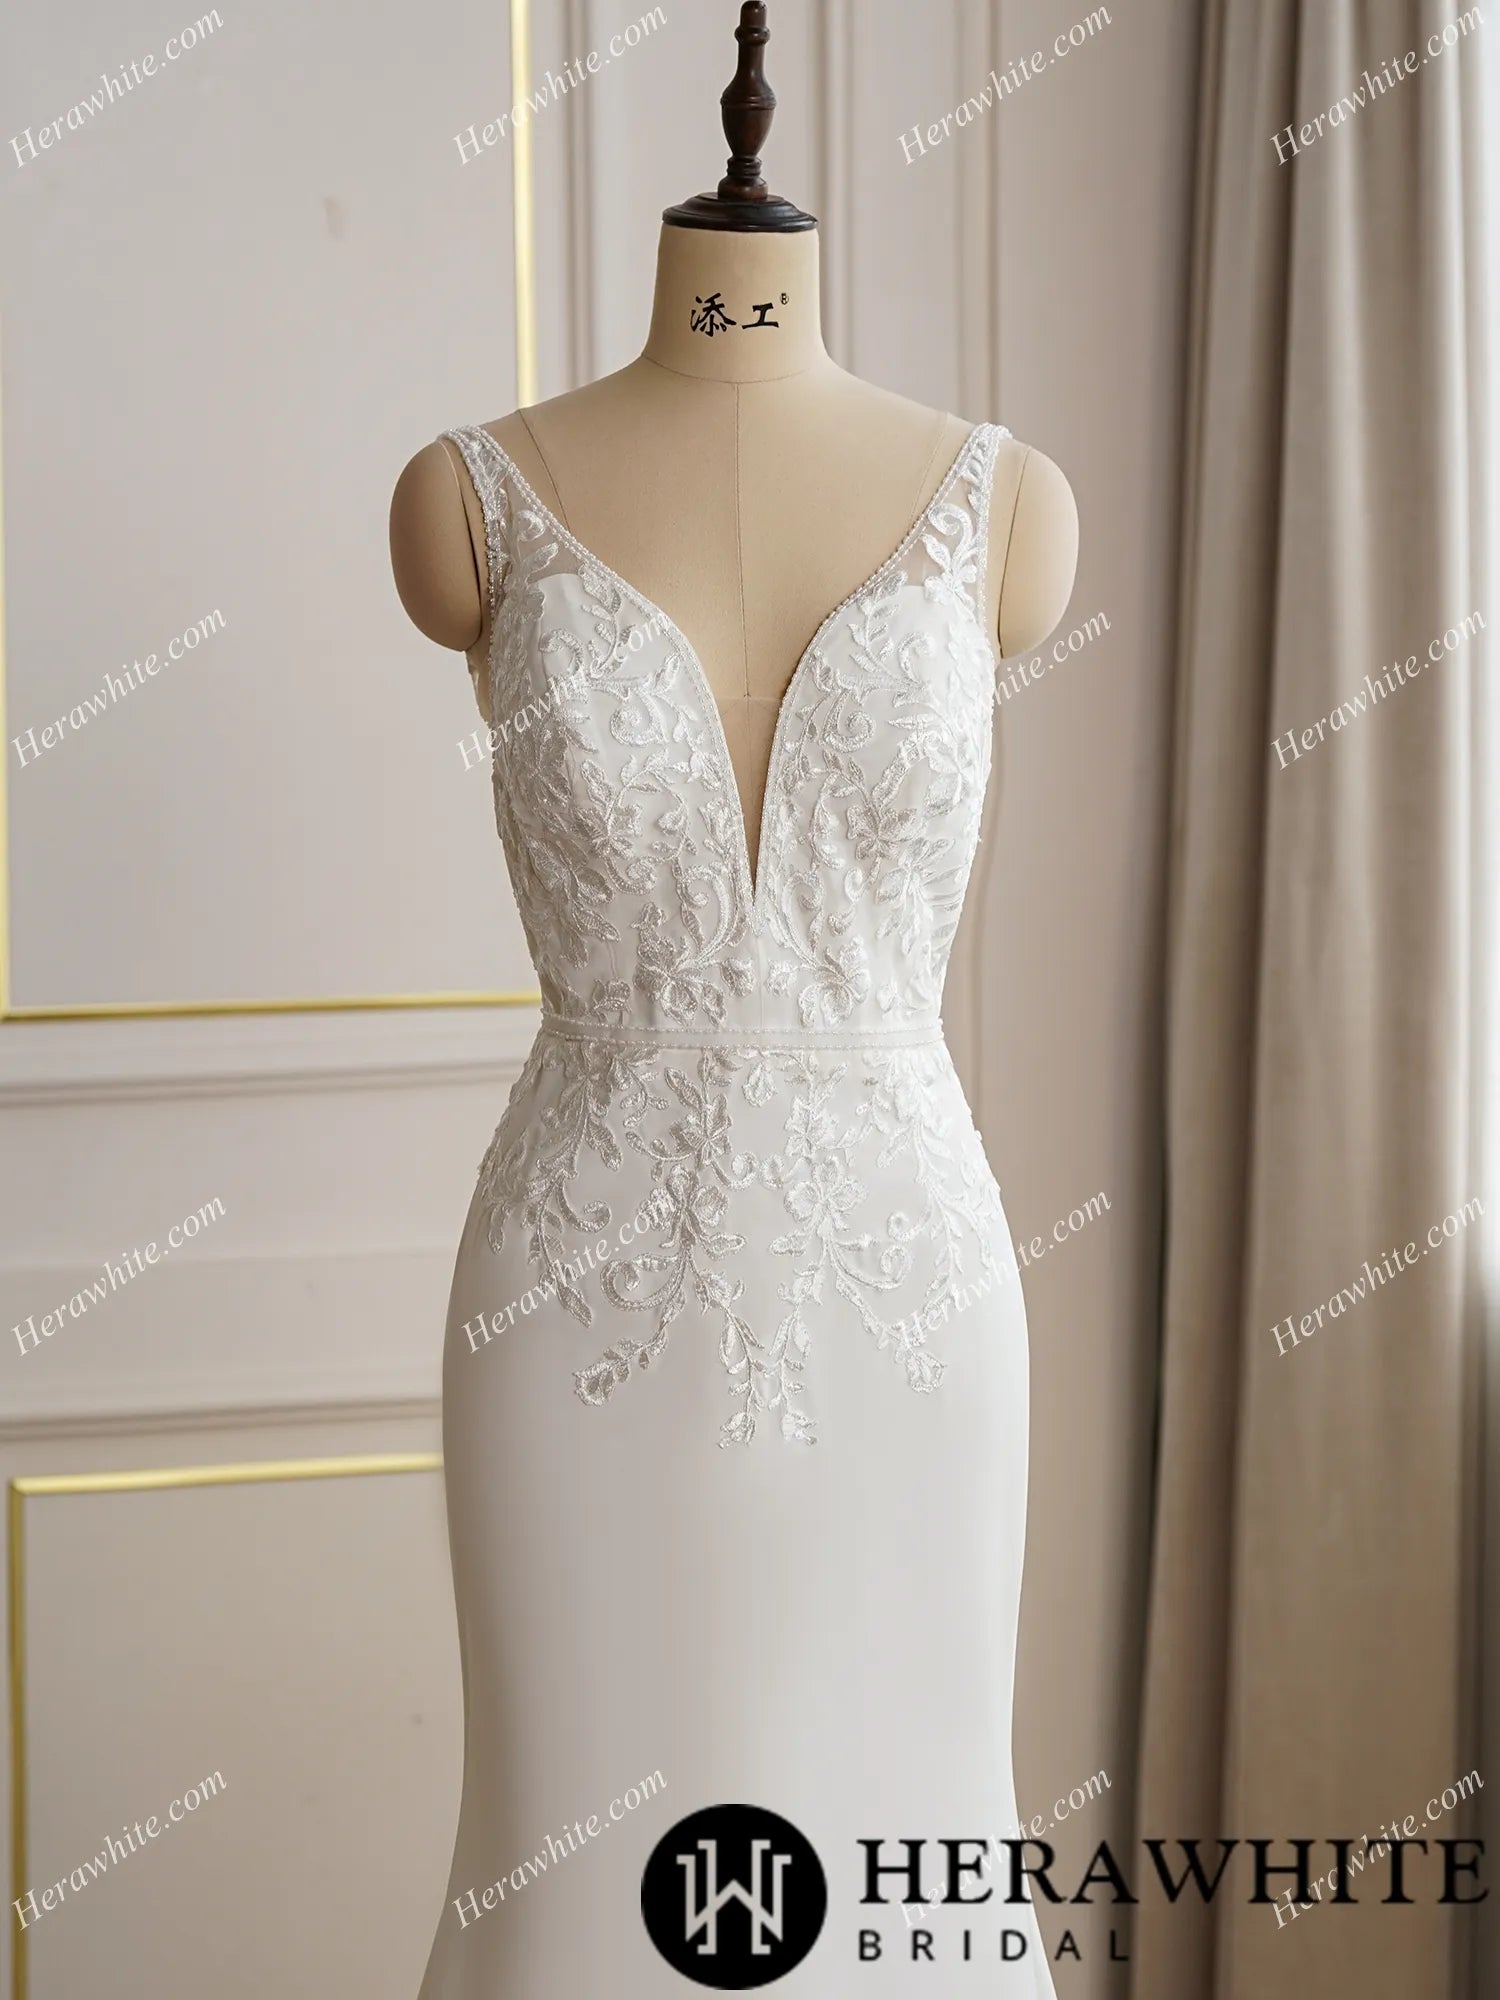 Beaded Lace Fit and Flare Bridal Gown With Lace Train